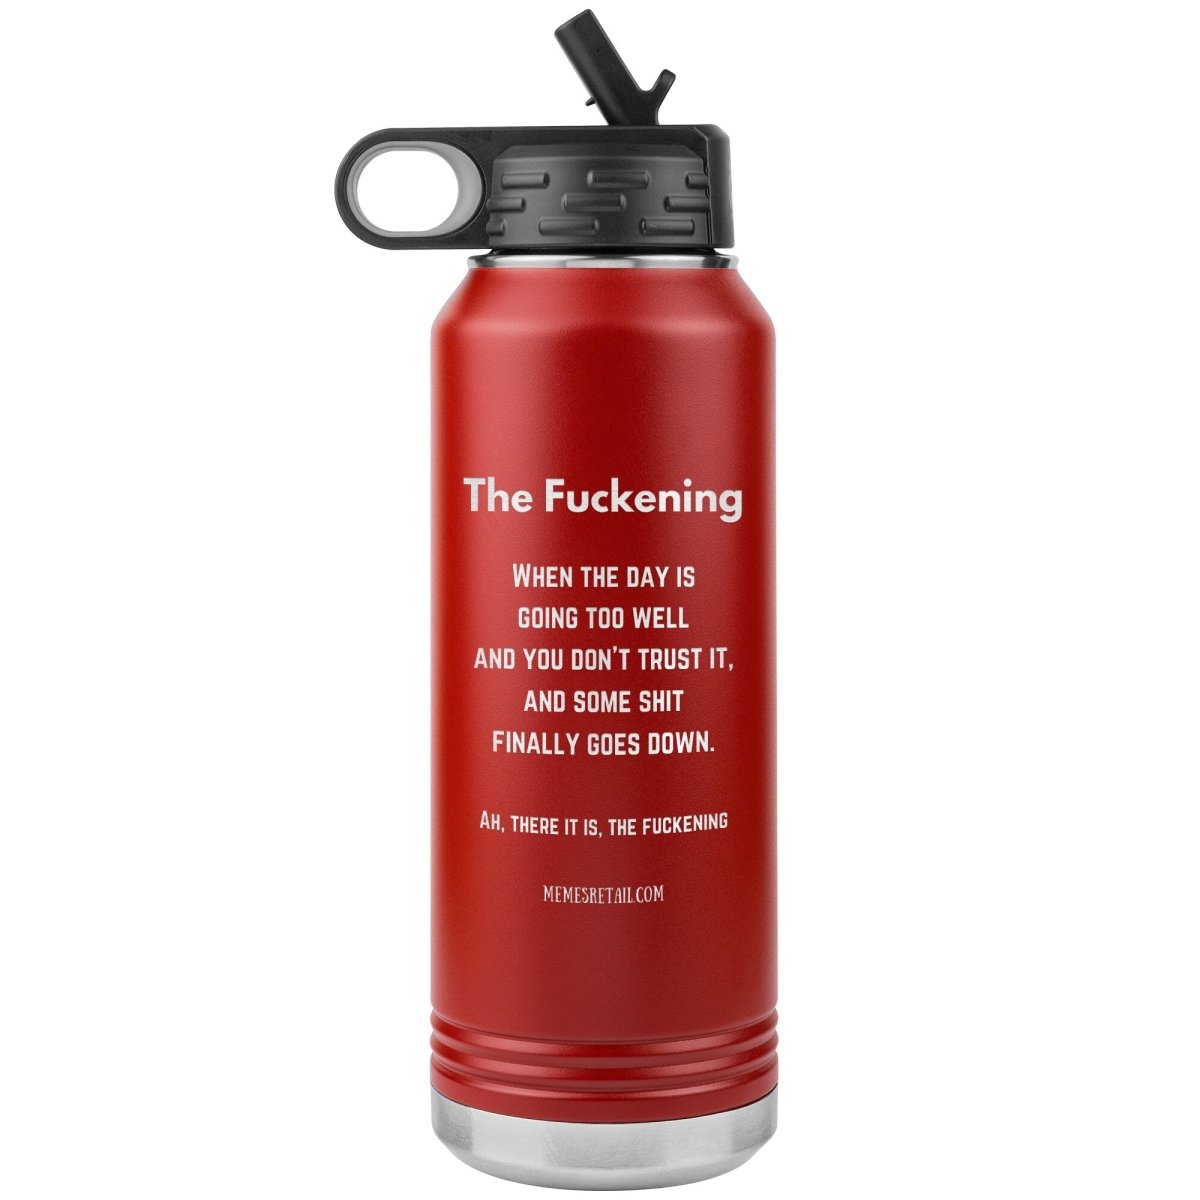 The Fuckening, When you don't trust the day. 32 oz Water Bottle, Red - MemesRetail.com